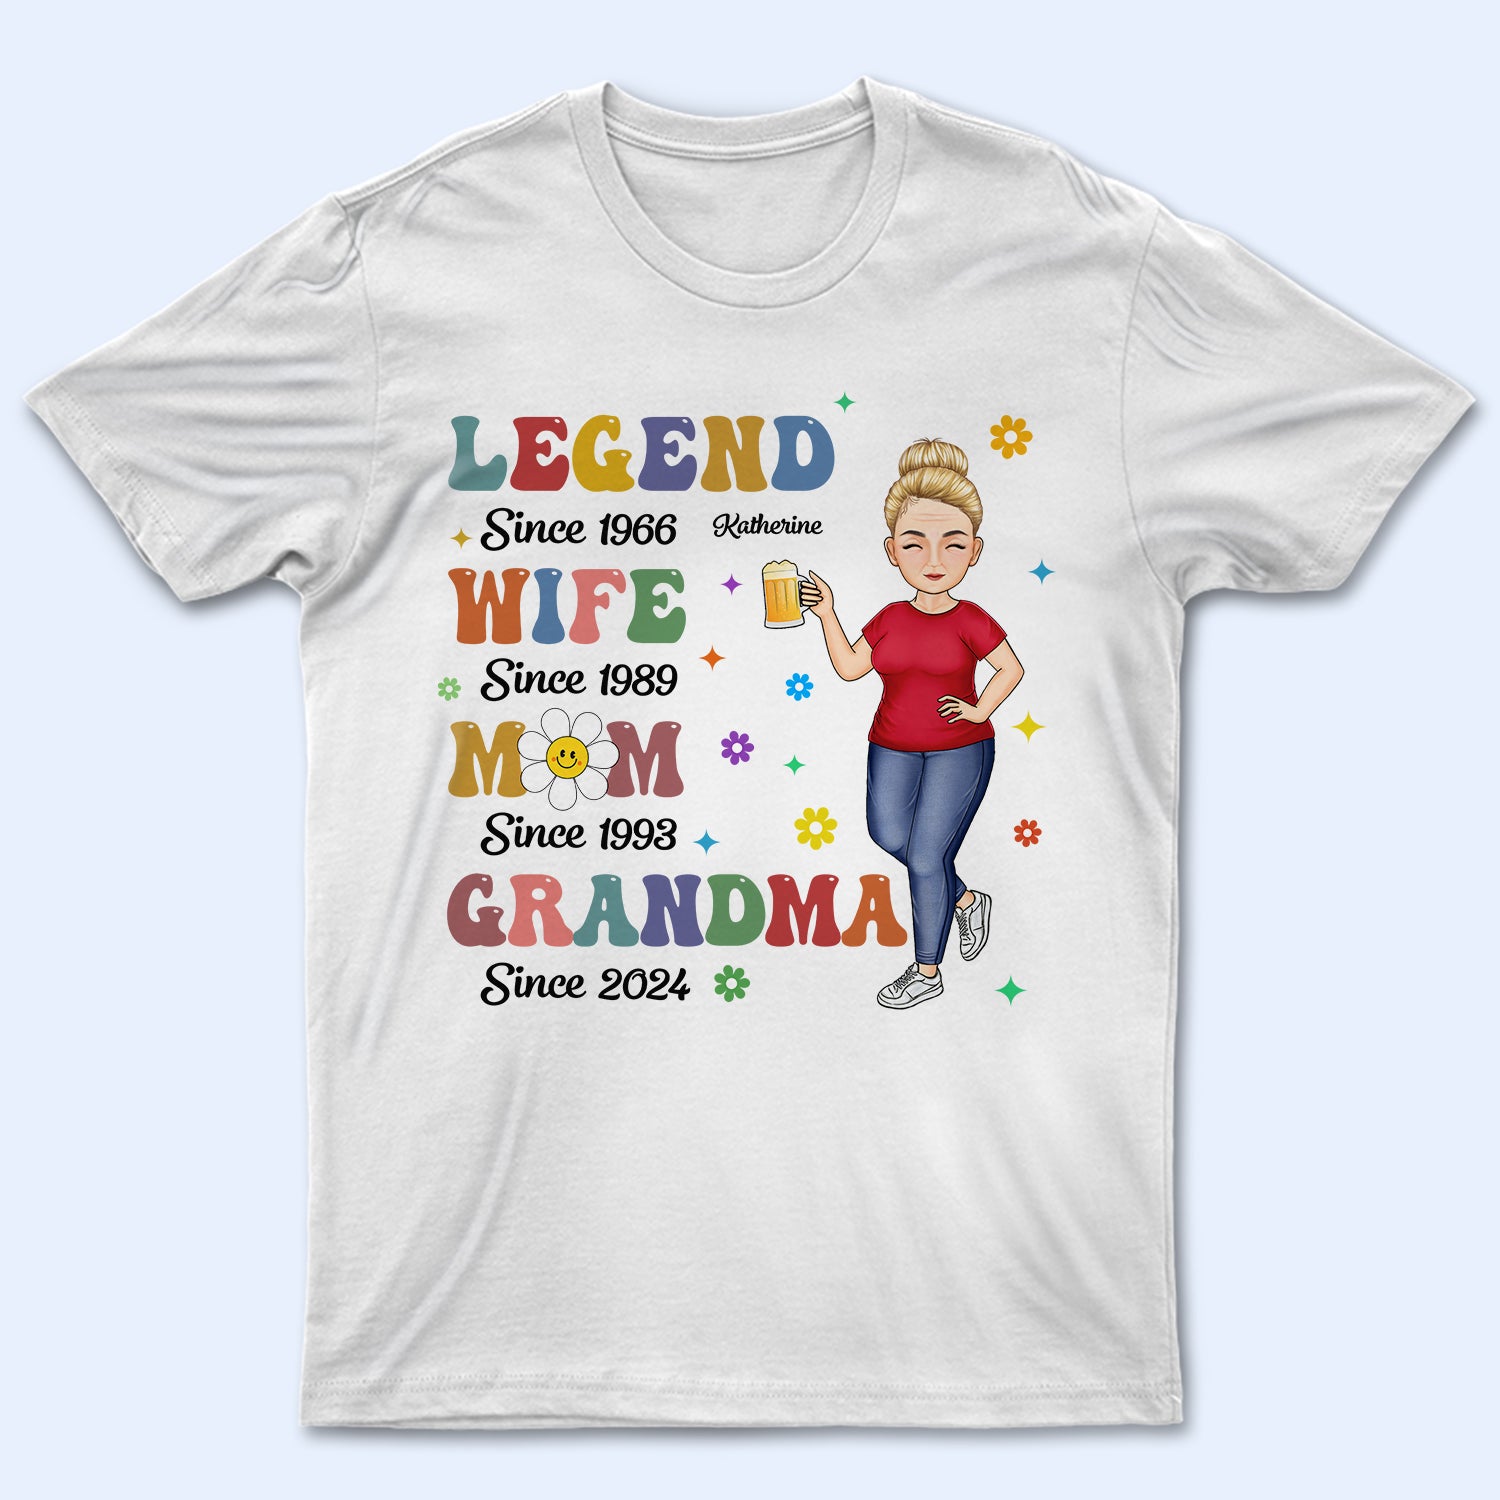 Legend Wife Mom Grandma - Birthday, Loving Gift For Mother, Grandmother - Personalized T Shirt